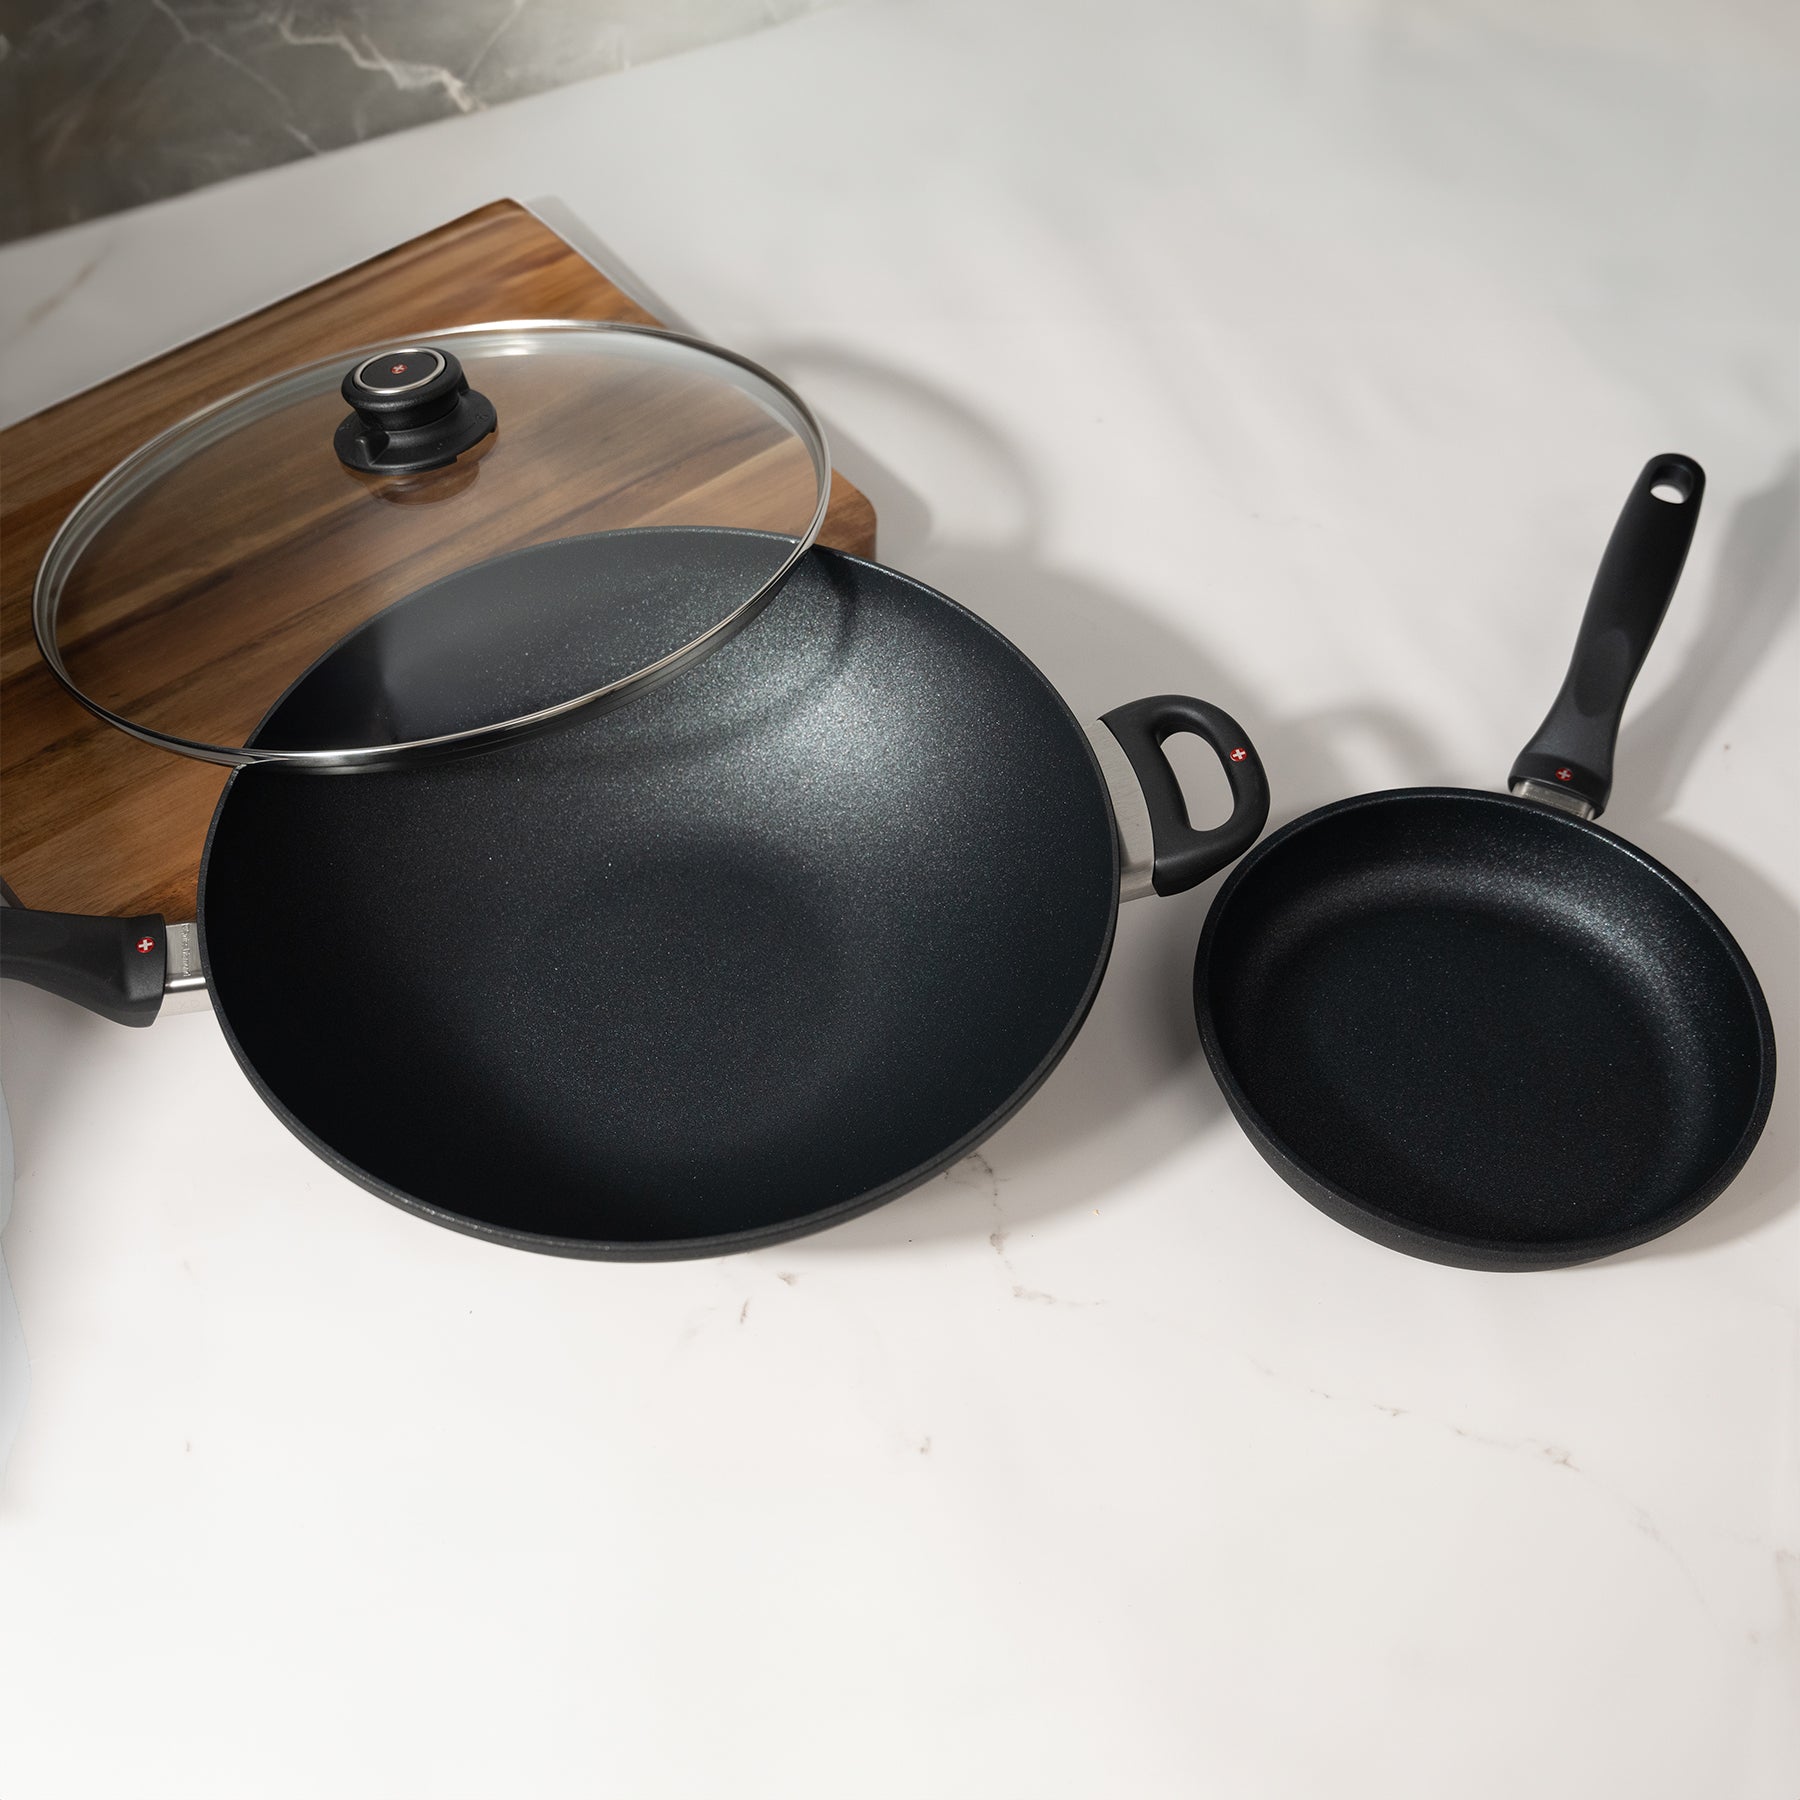 XD Nonstick 8" Fry Pan and 12.5" Wok with Glass Lid Set on kitchen counter with cutting board next to it